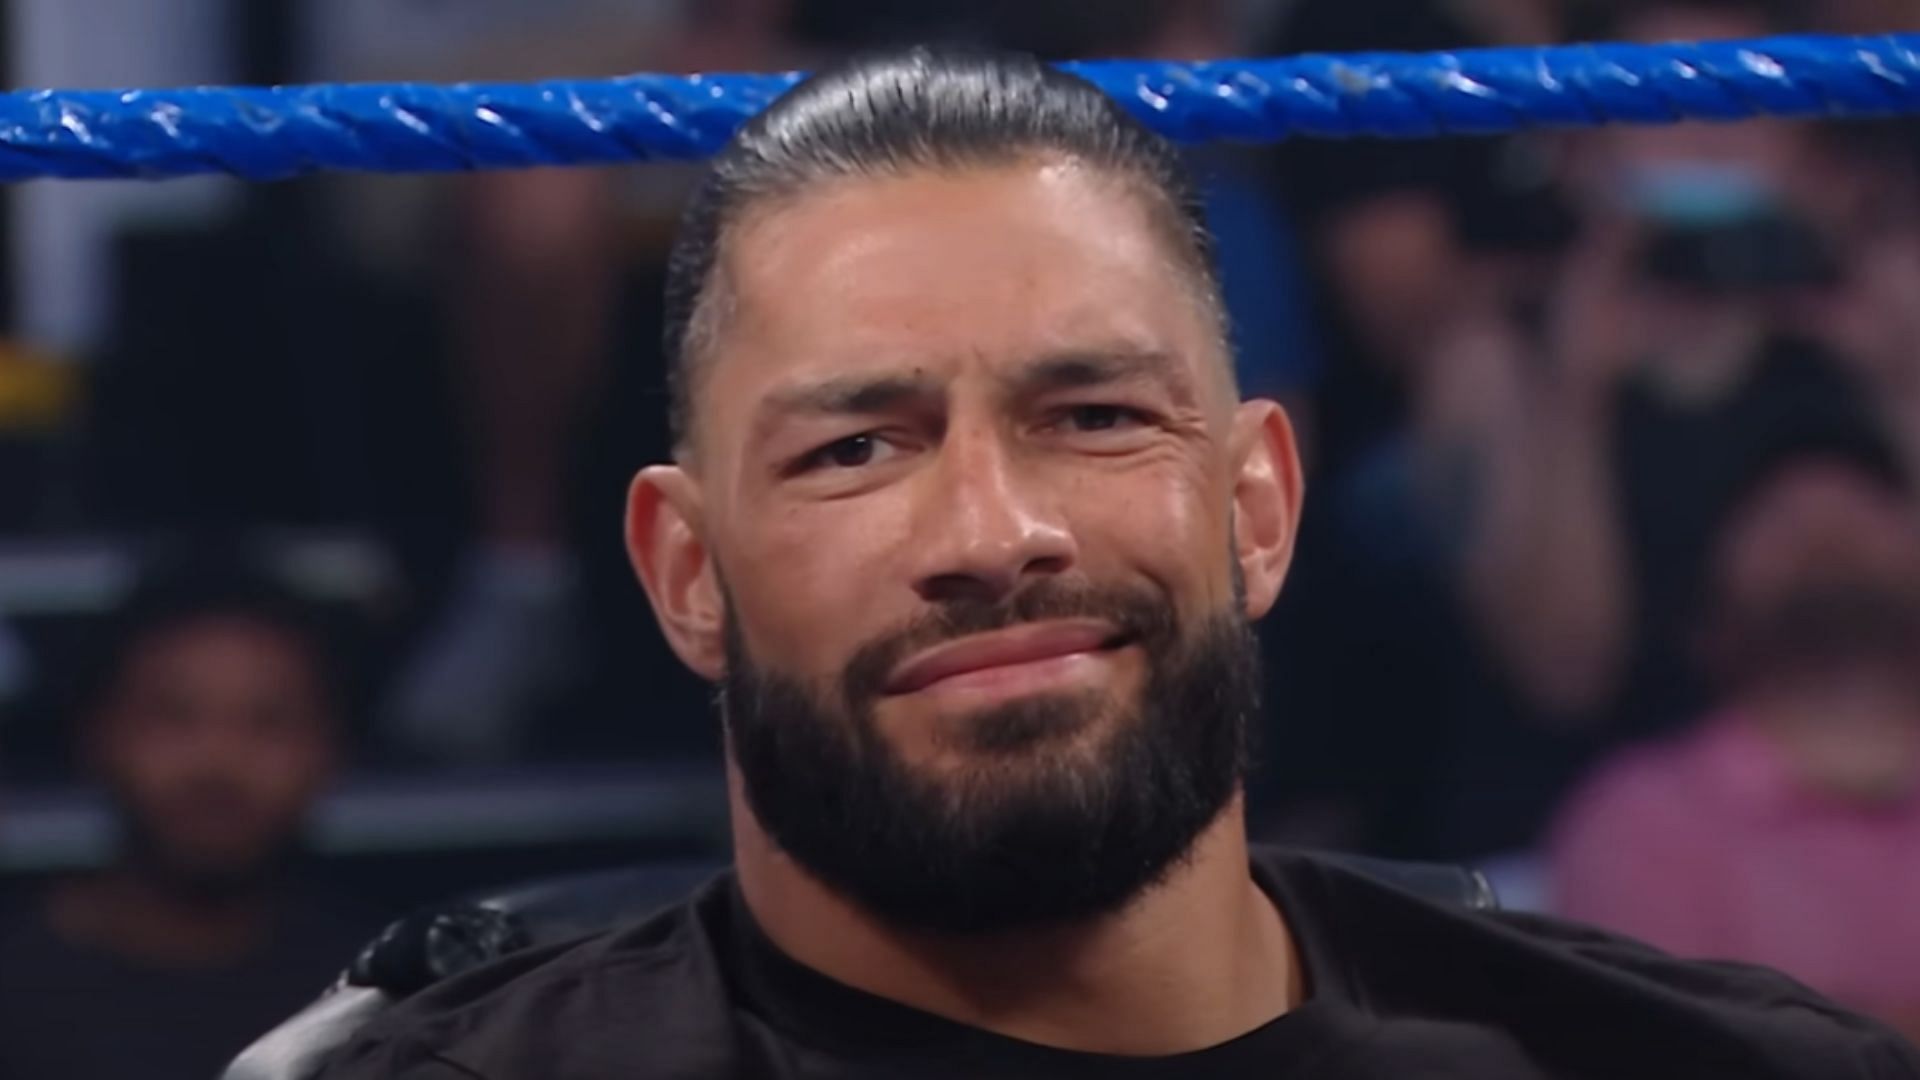 Roman Reigns is arguably WWE